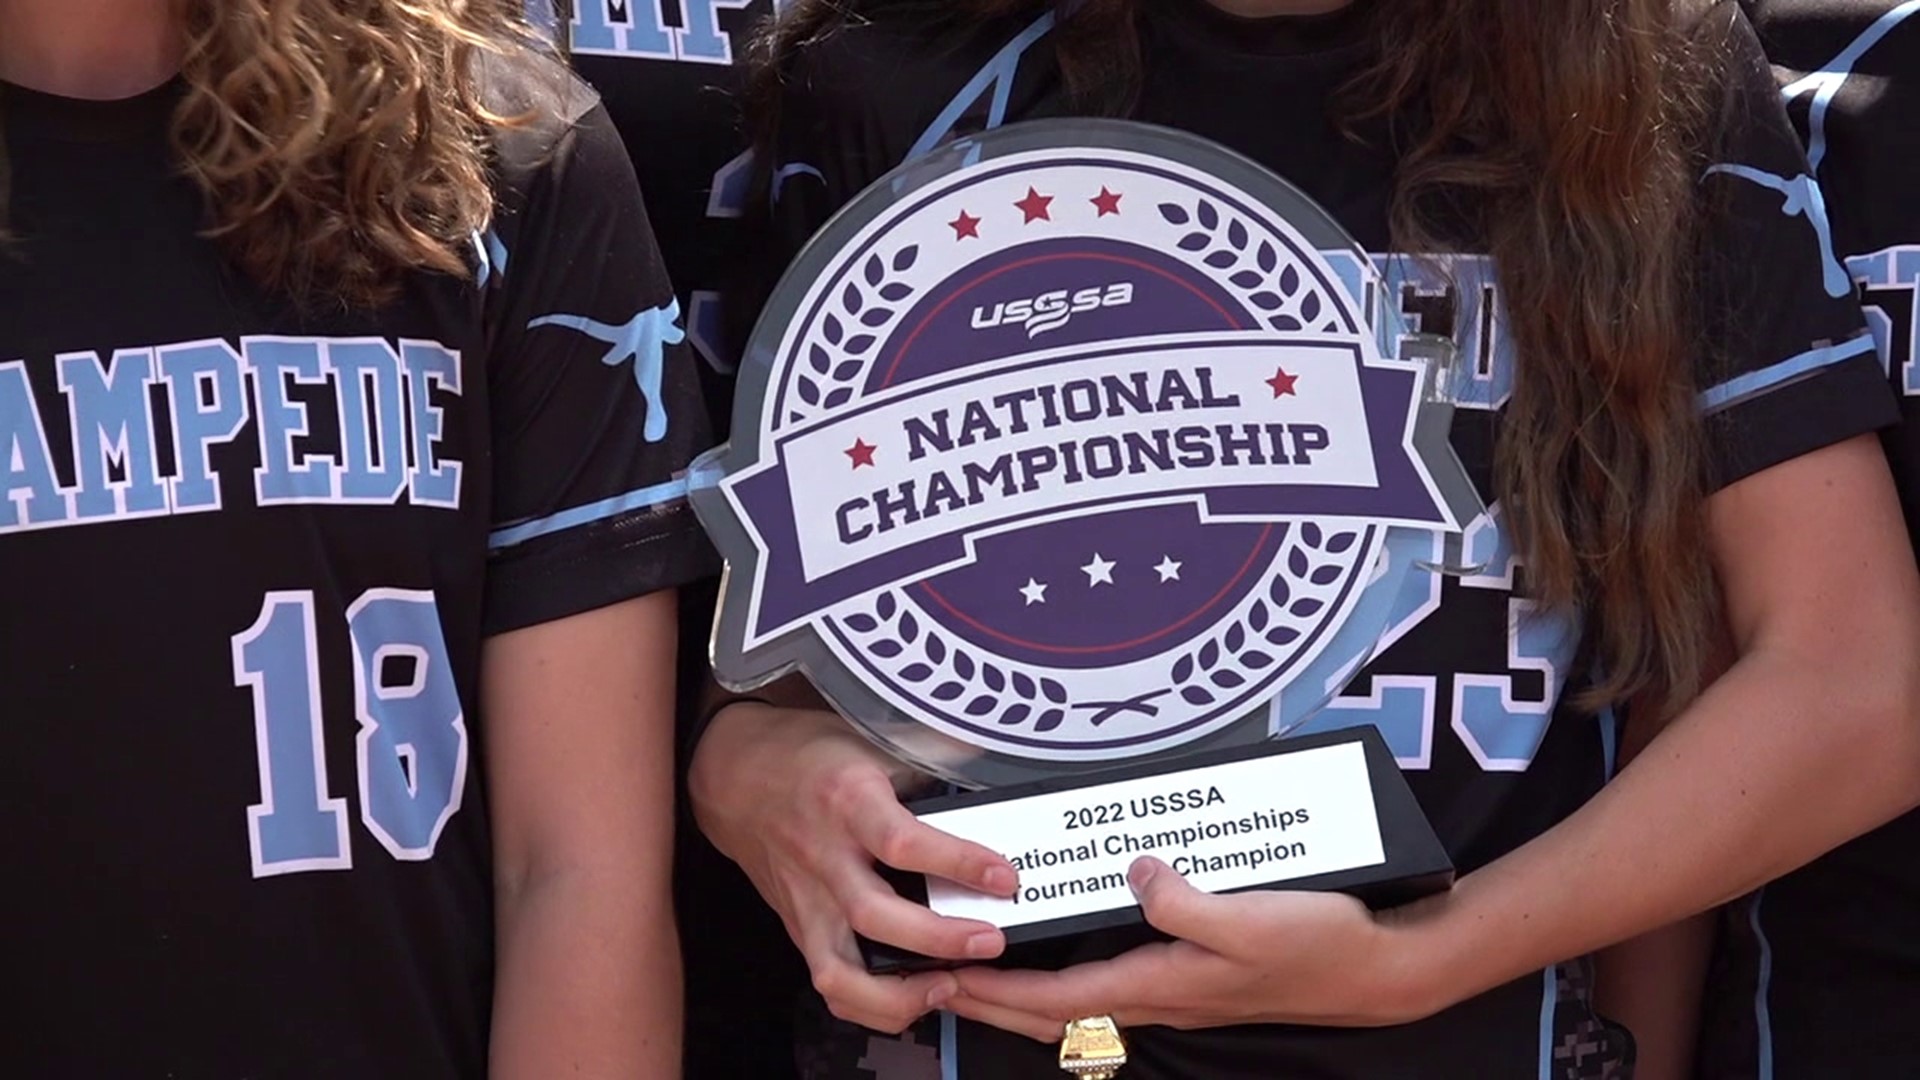 The girls' softball team from Schuylkill County celebrated a National Championship Tuesday.